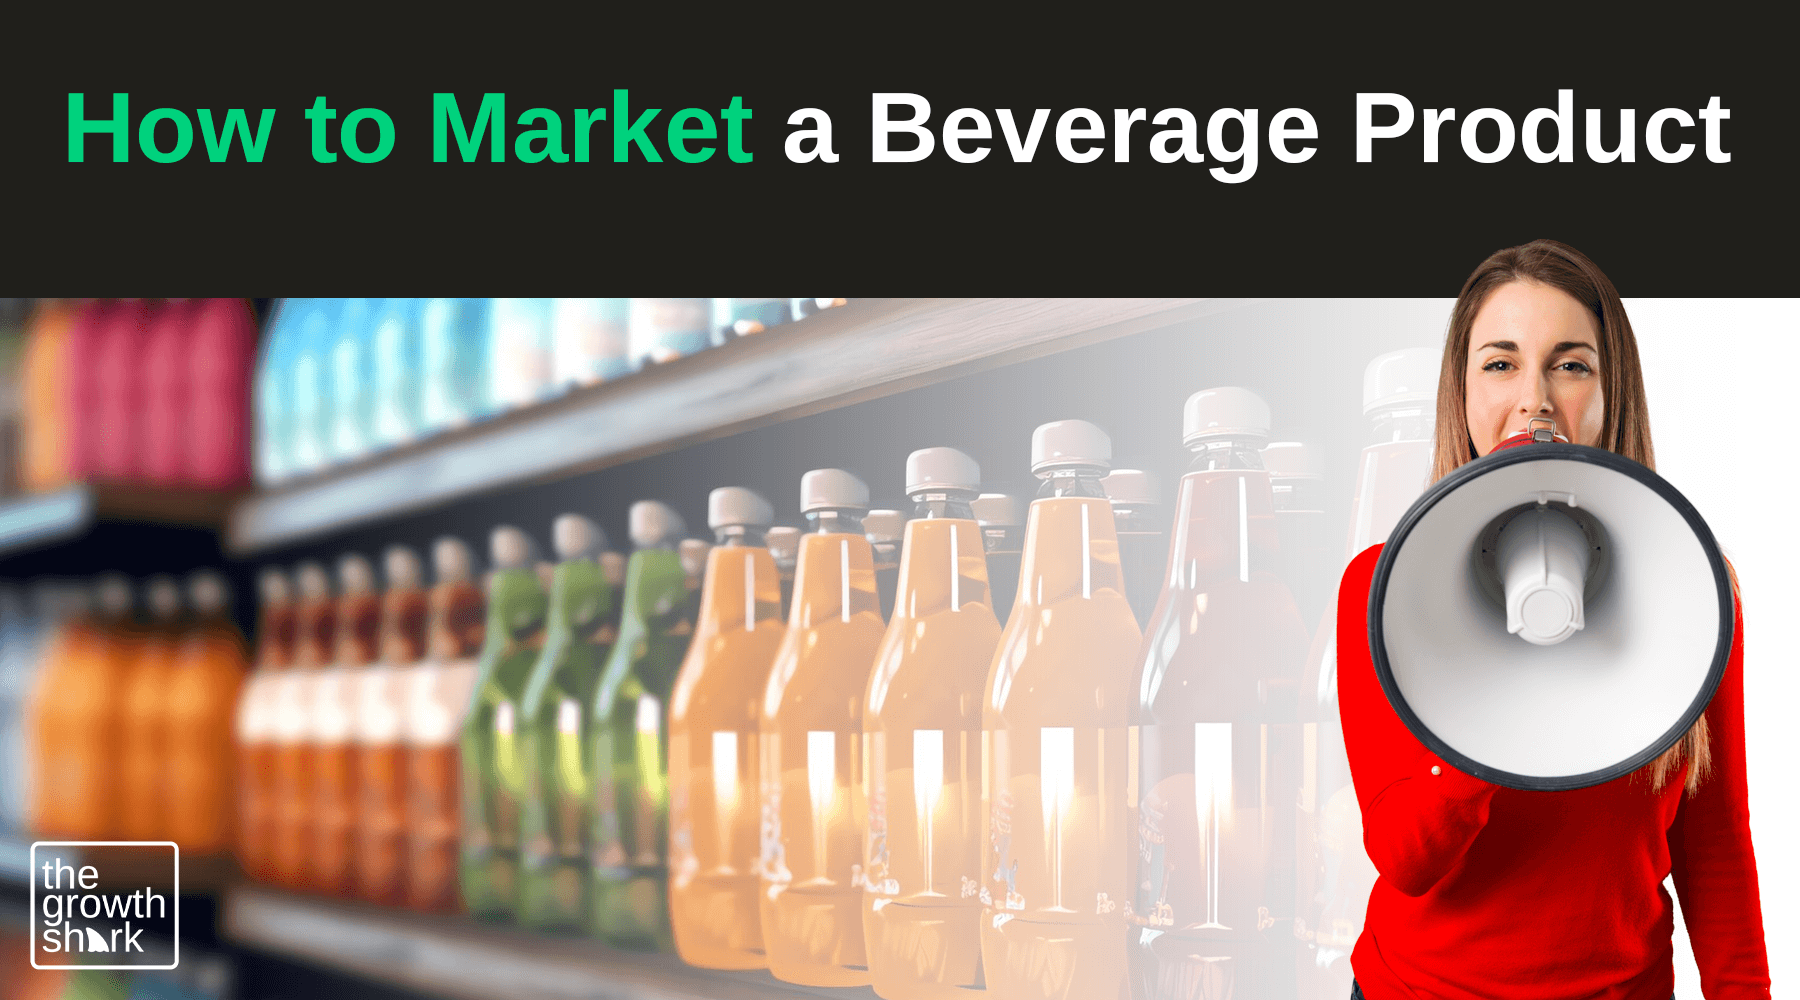 Learn effective ways to market your beverage products